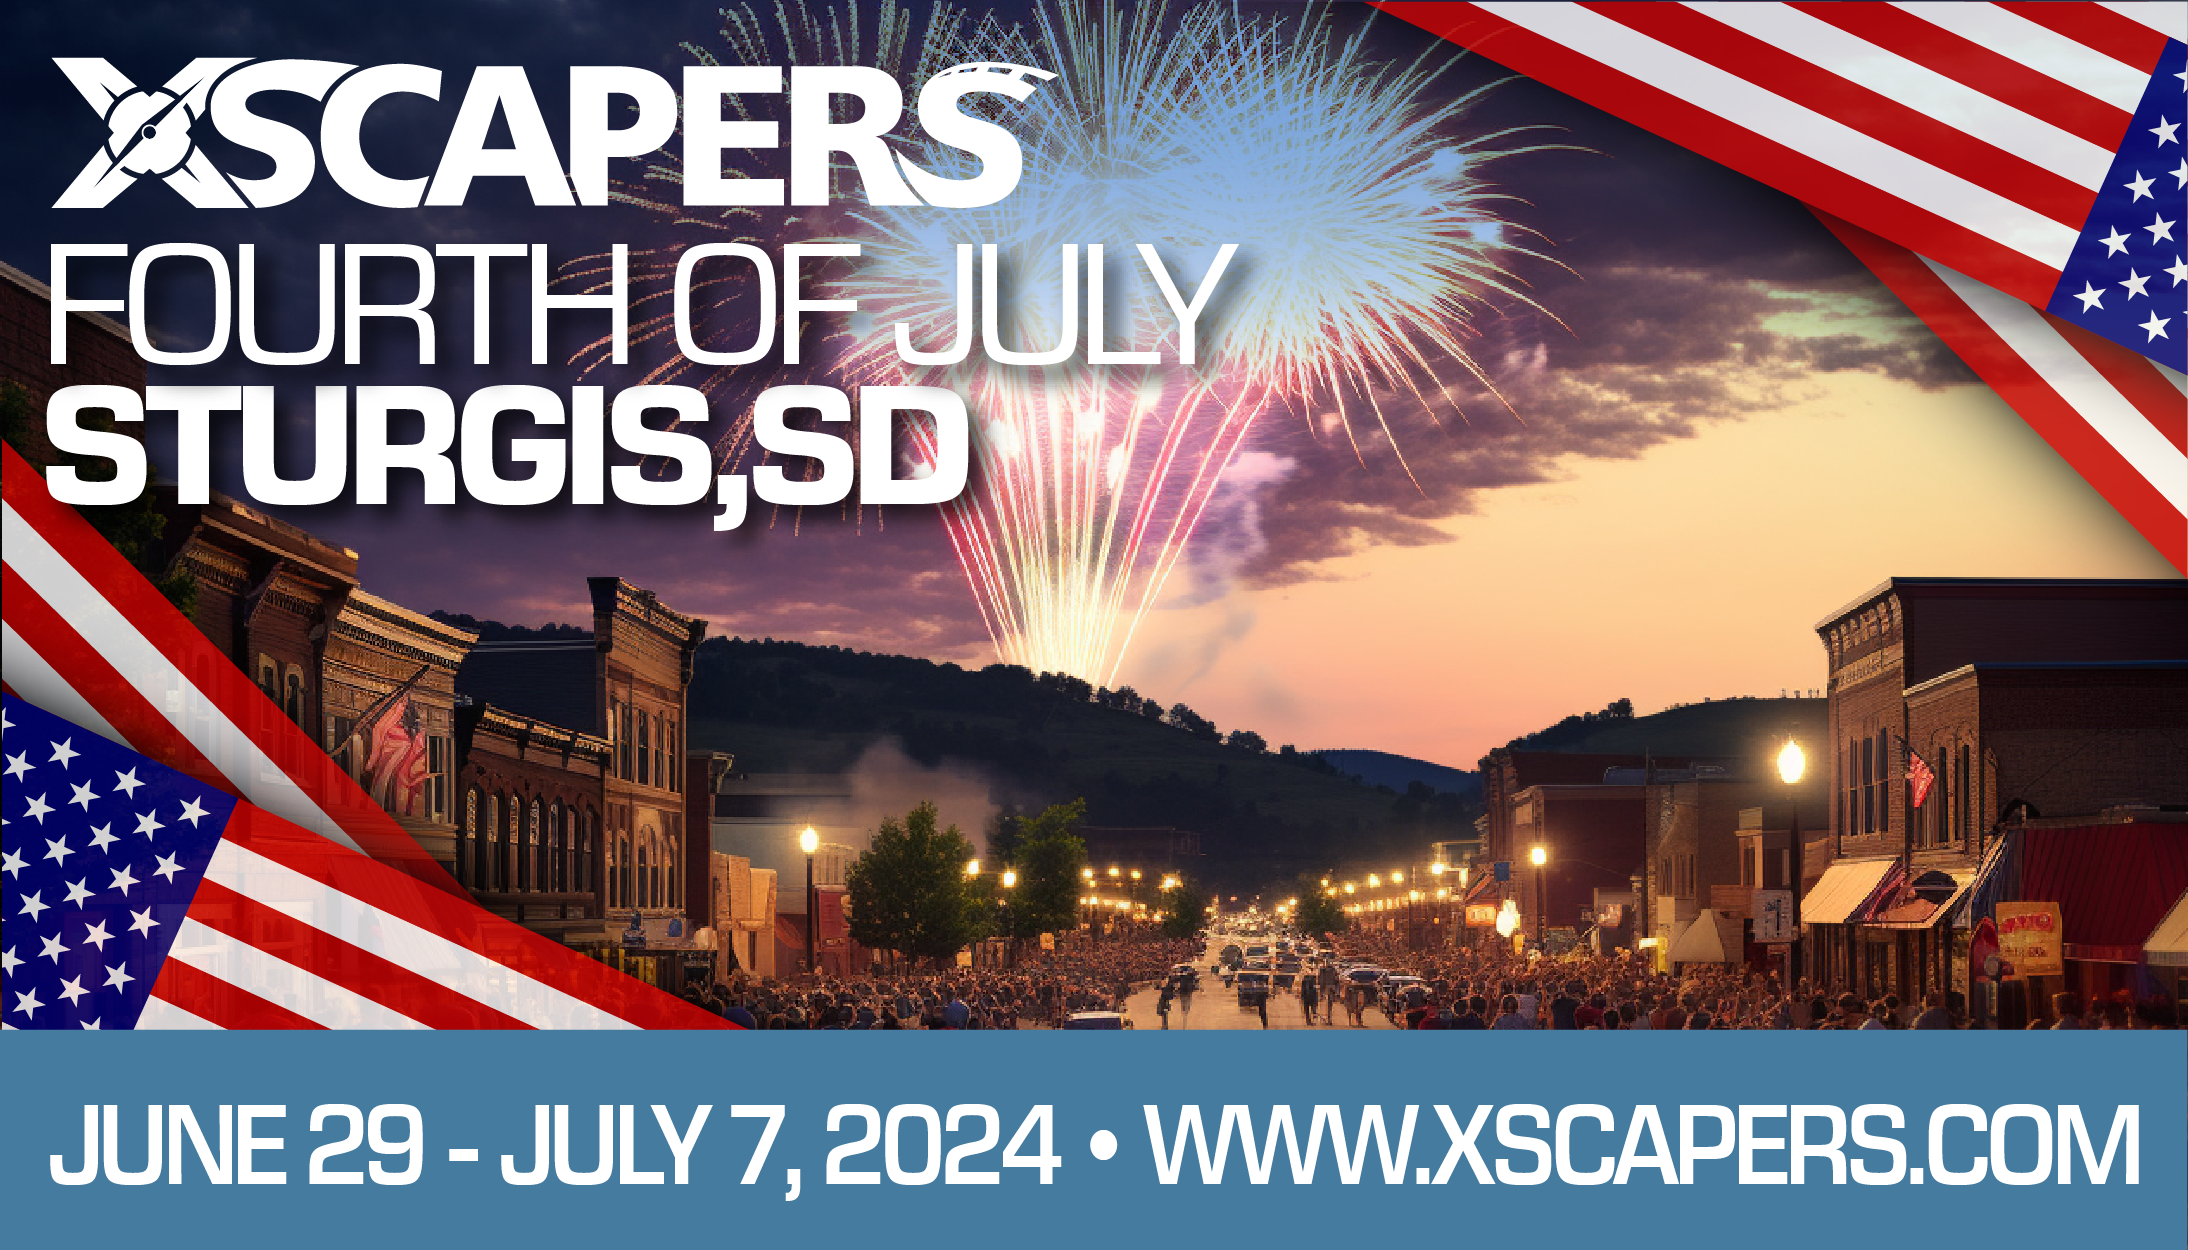 Xscapers Sturgis 4th of July 2024 - SOLD OUT 15